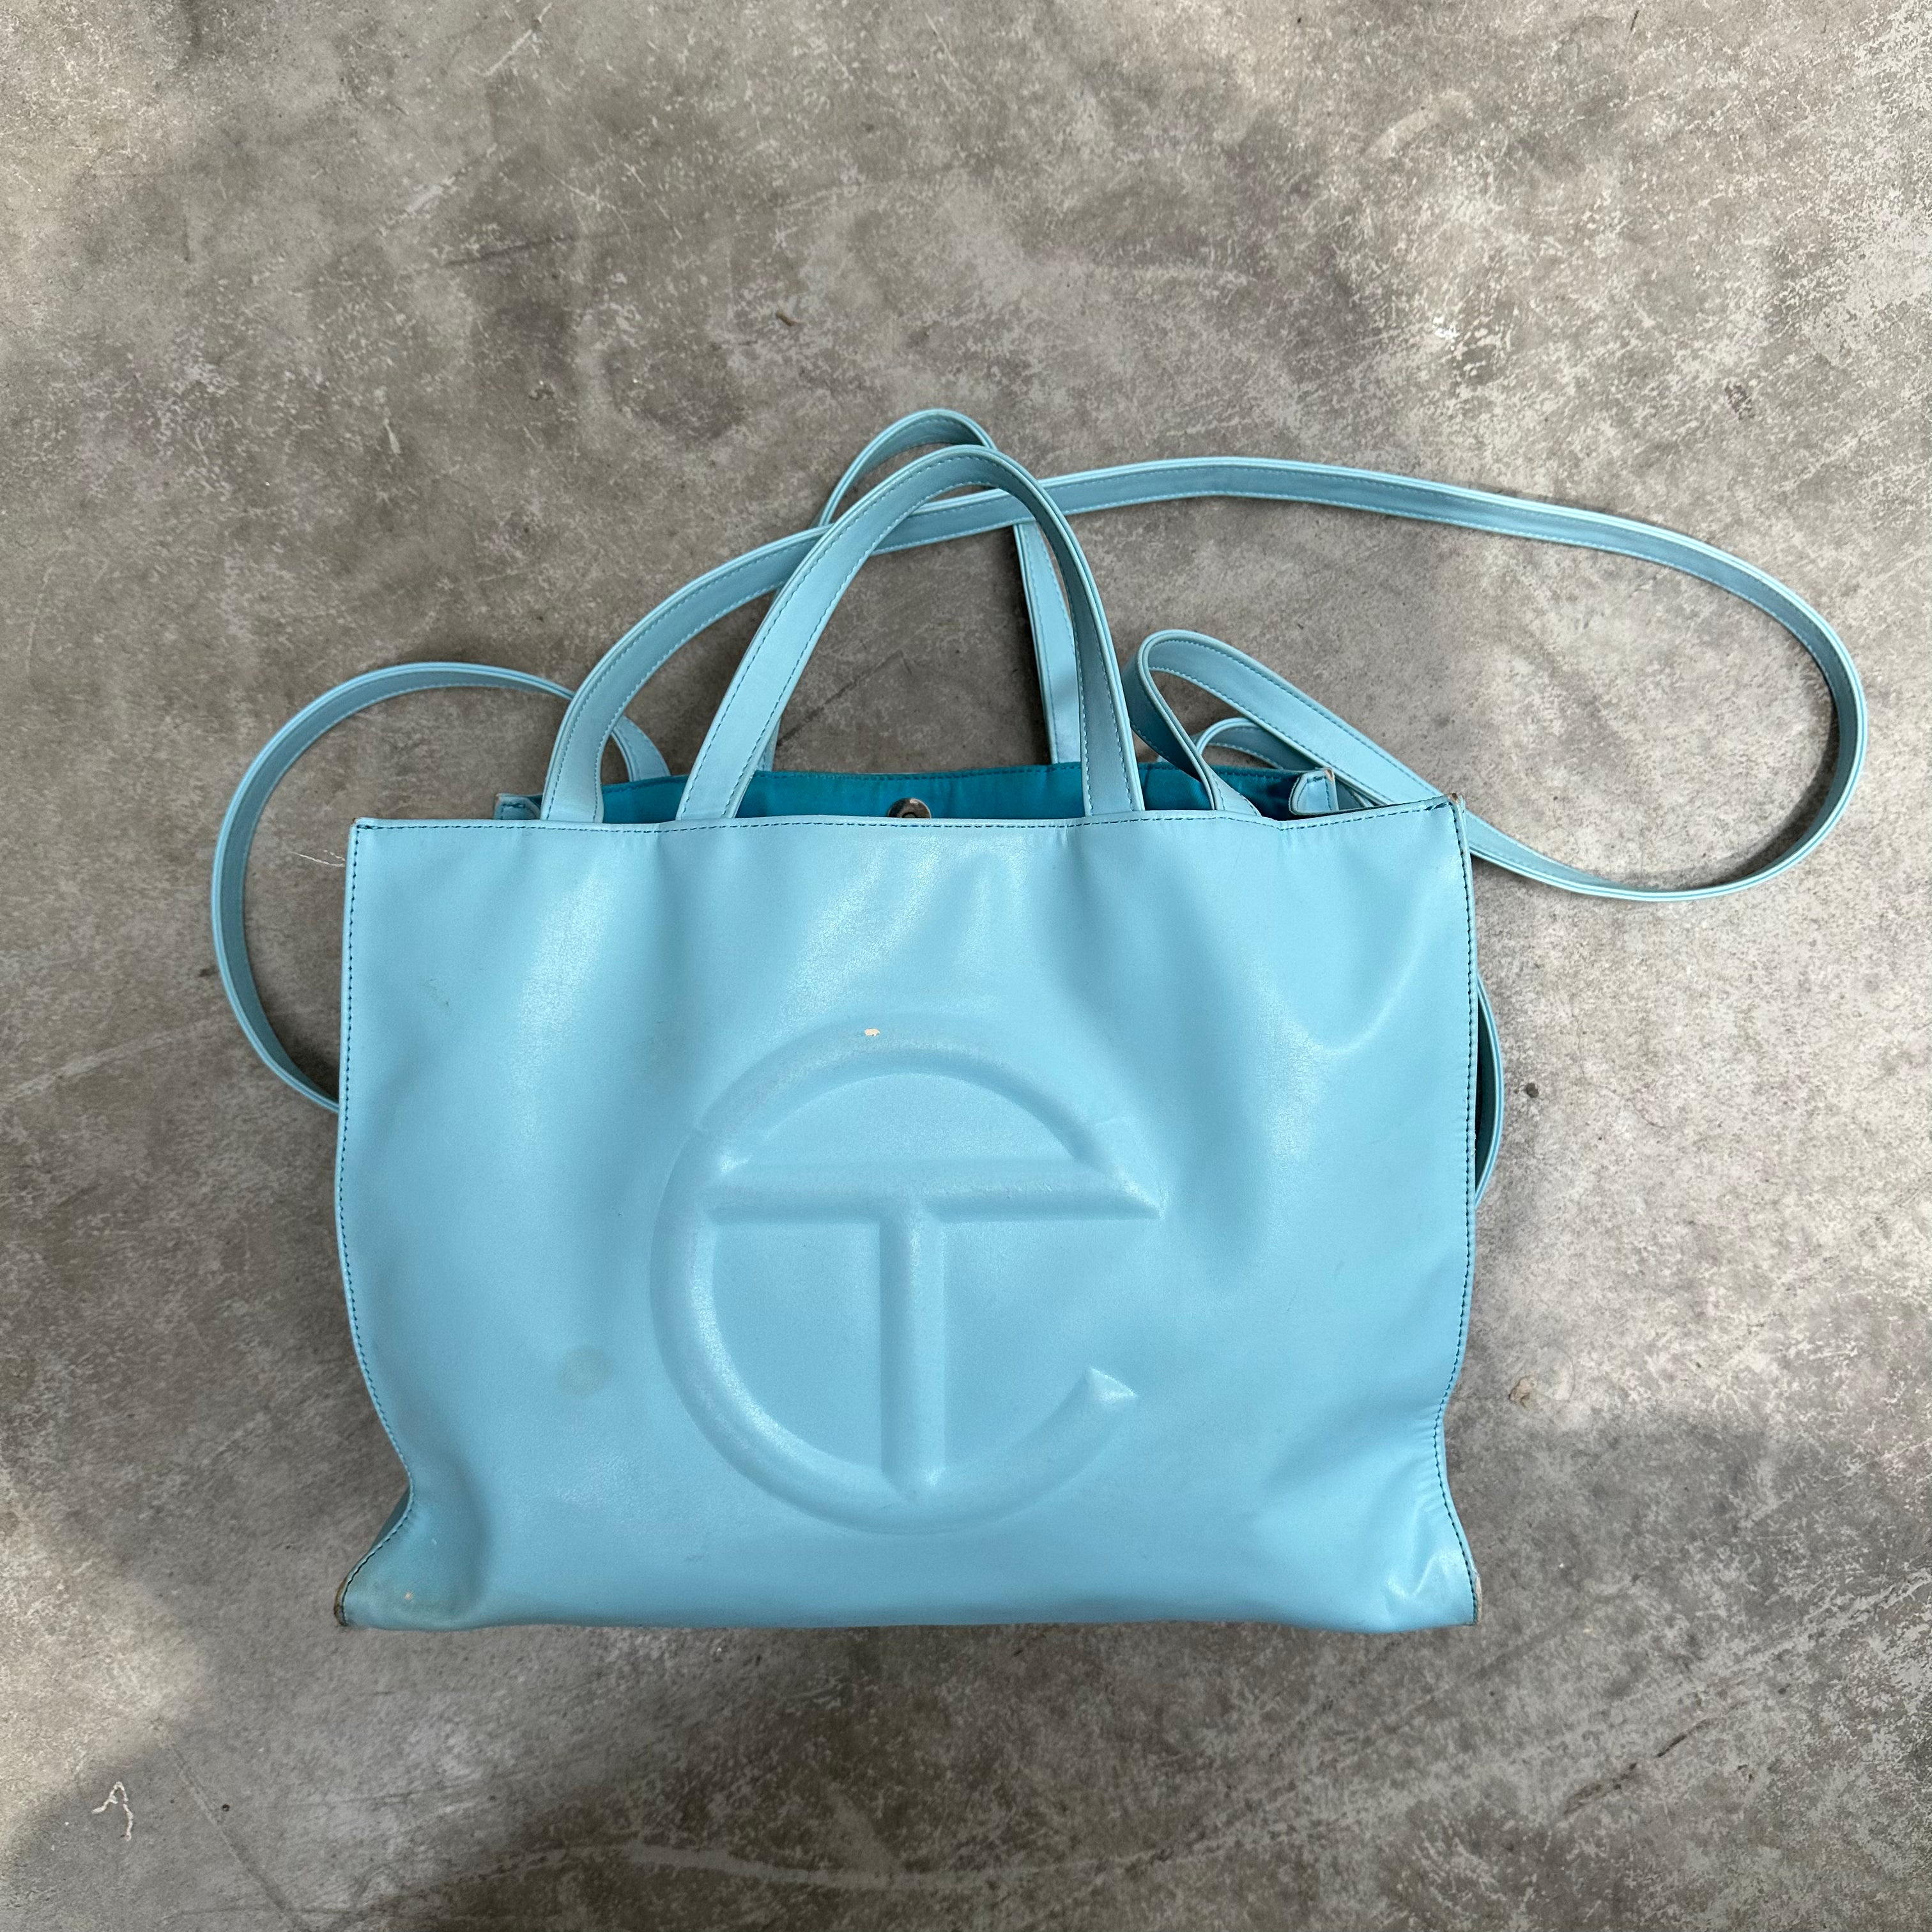 Telfar Shopping Bag Large Pool Blue – Curated by Charbel